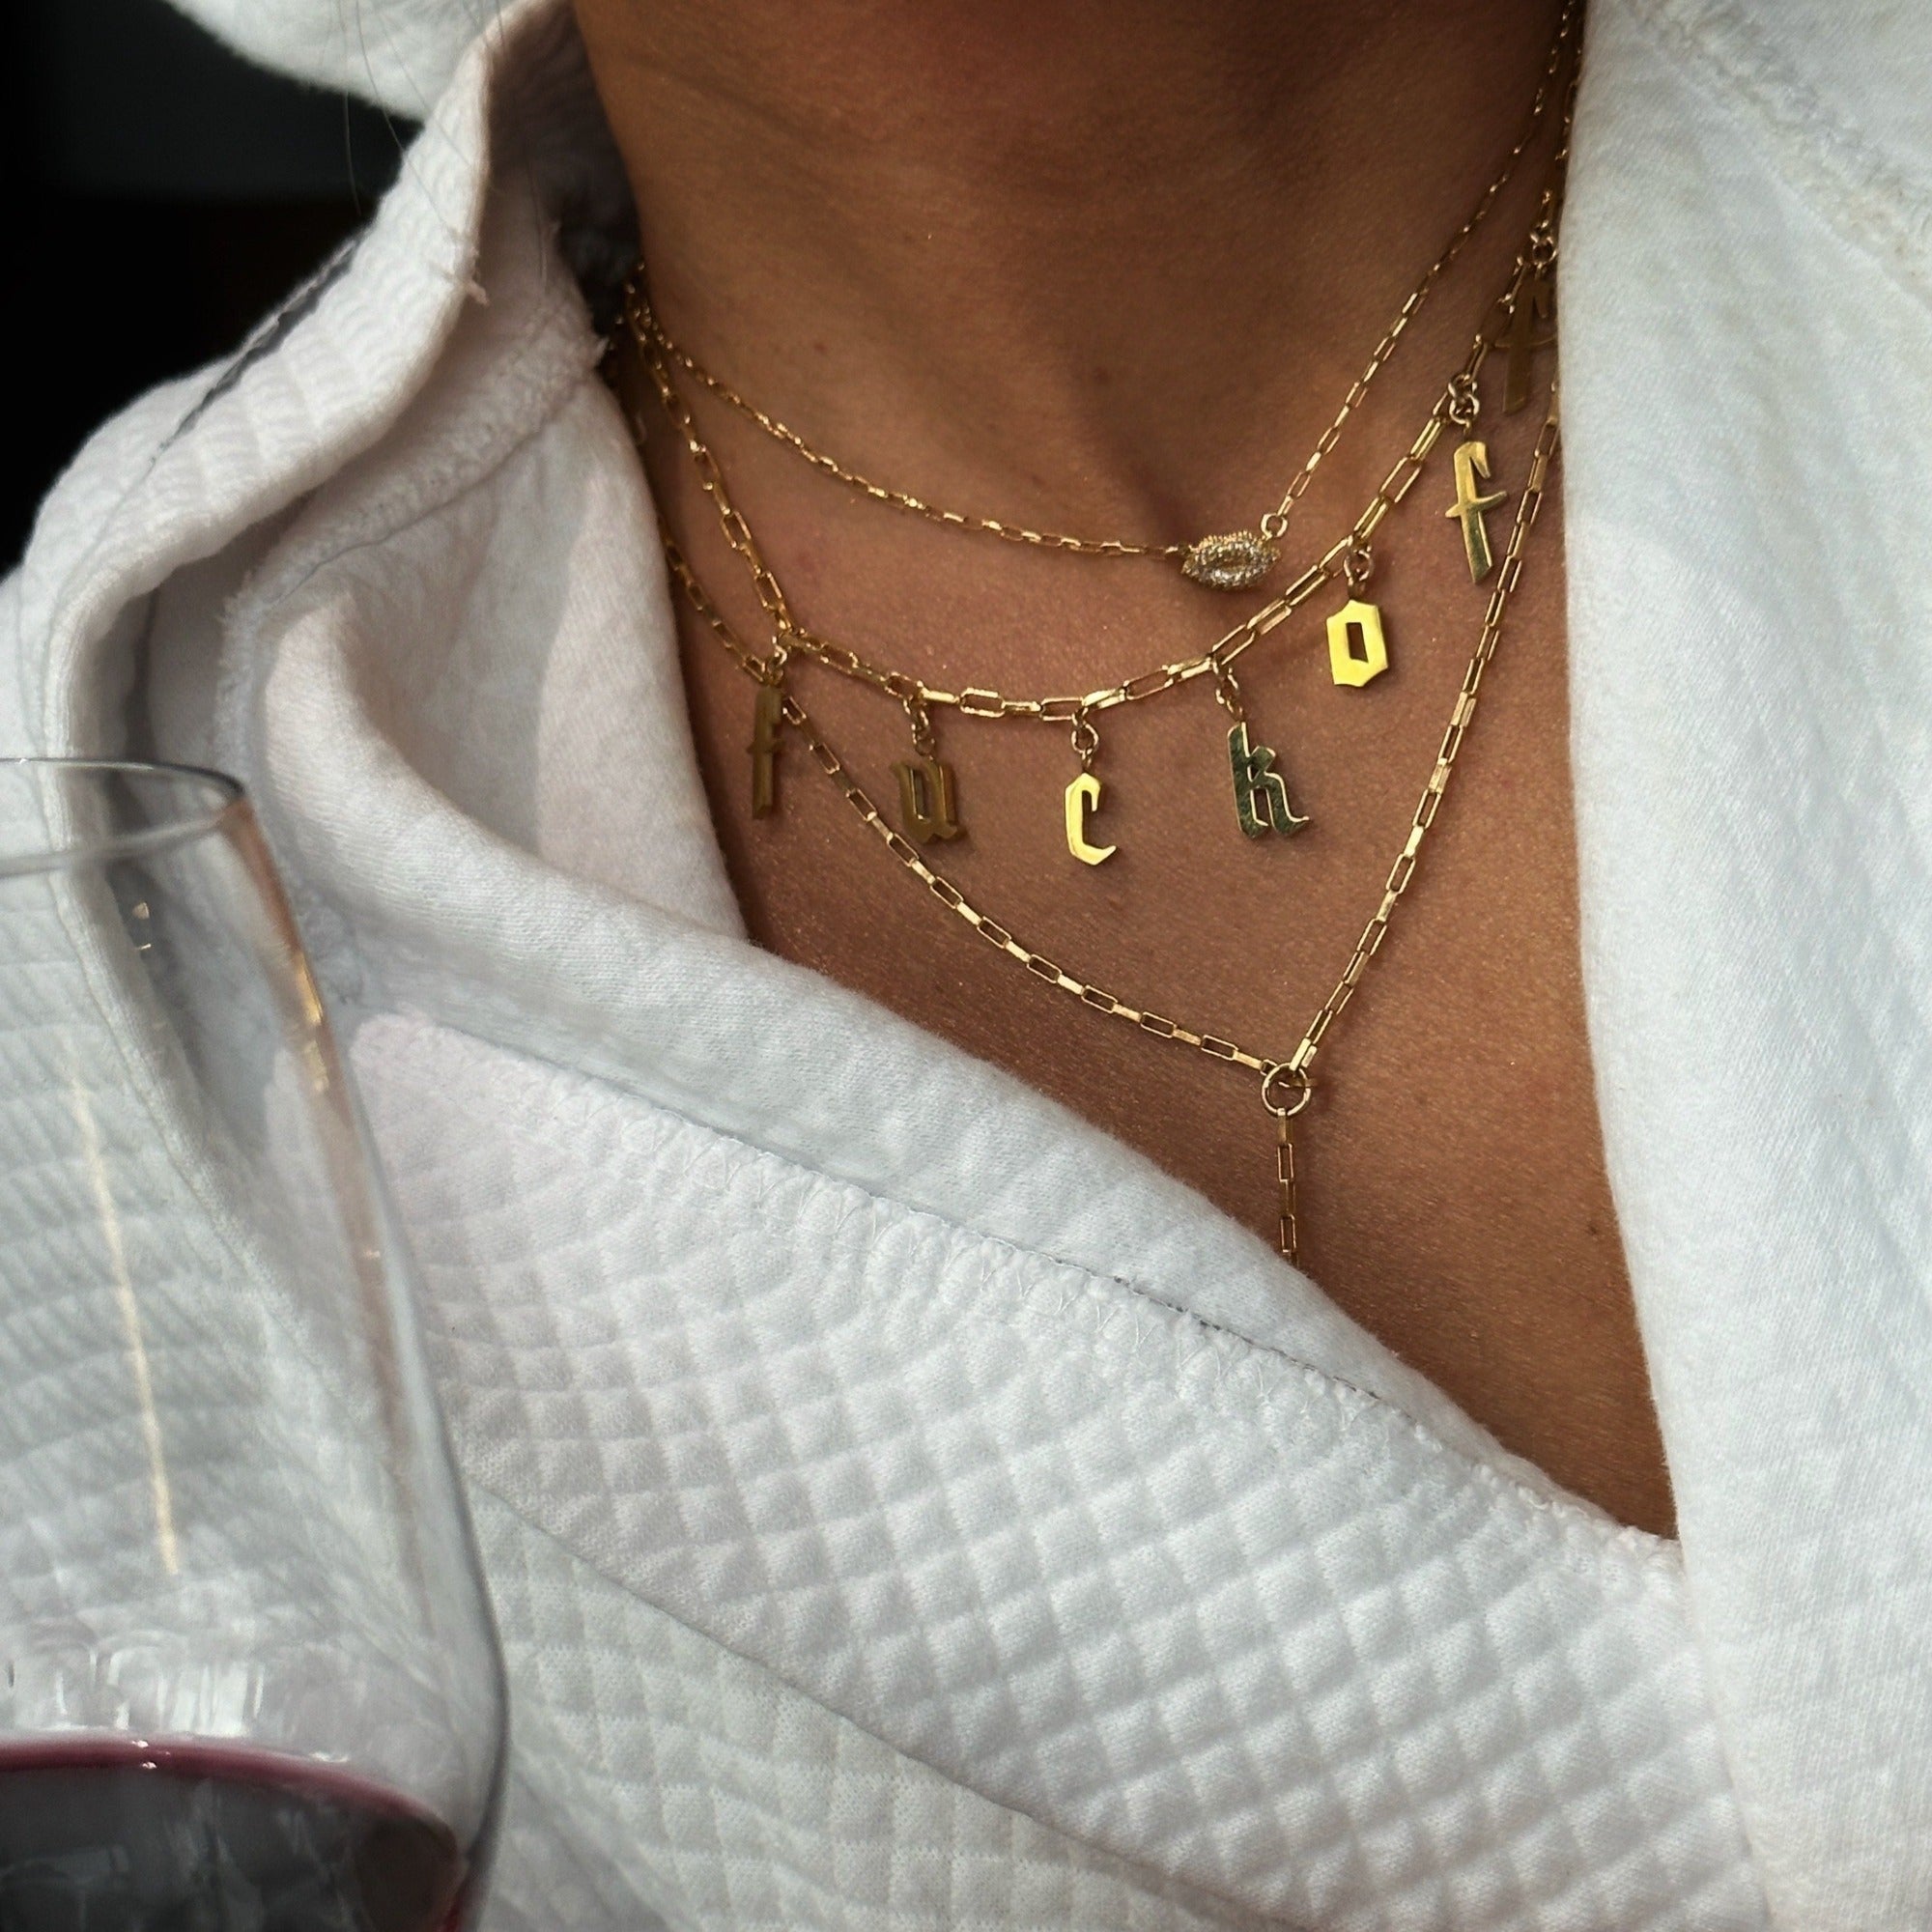 The Fuck Off Necklace by Erin Fader Jewelry